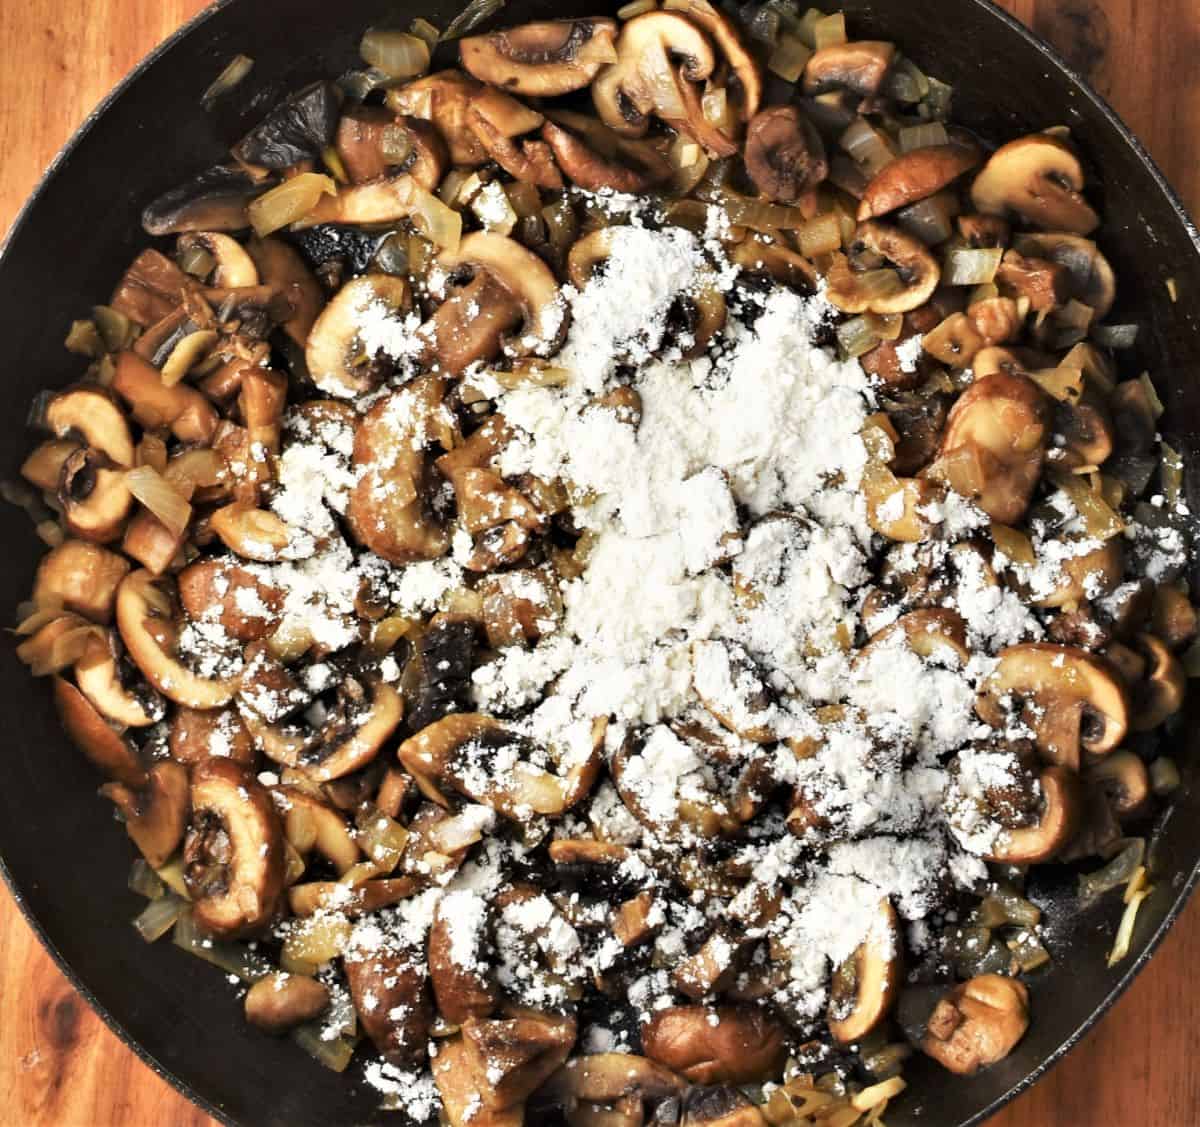 Fried mushrooms with flour in large pan.